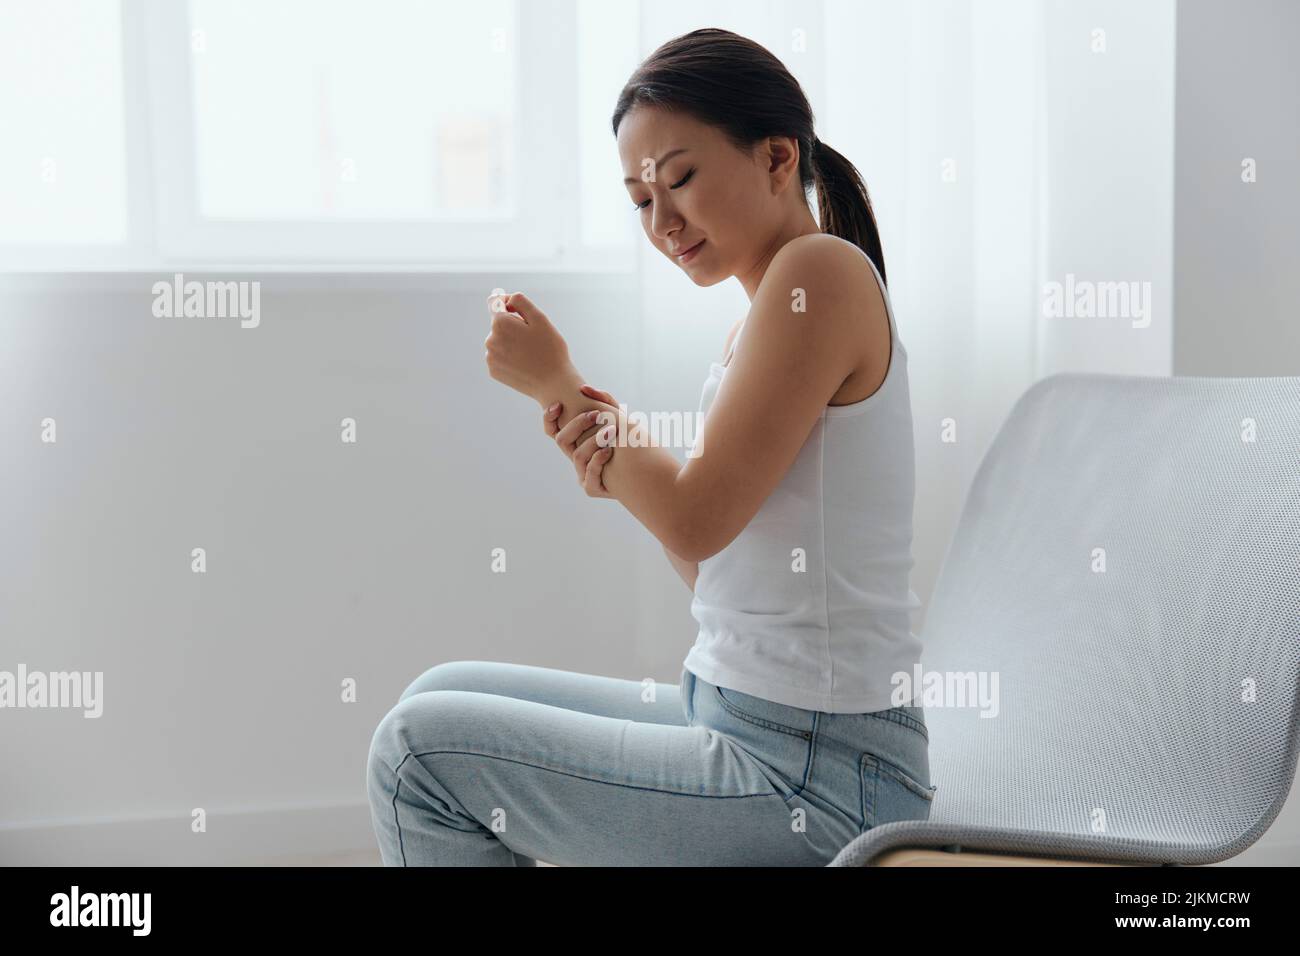 https://c8.alamy.com/comp/2JKMCRW/tormented-suffering-from-dislocation-tanned-beautiful-young-asian-woman-hurting-holding-painful-wrist-at-home-interior-living-room-injuries-poor-2JKMCRW.jpg